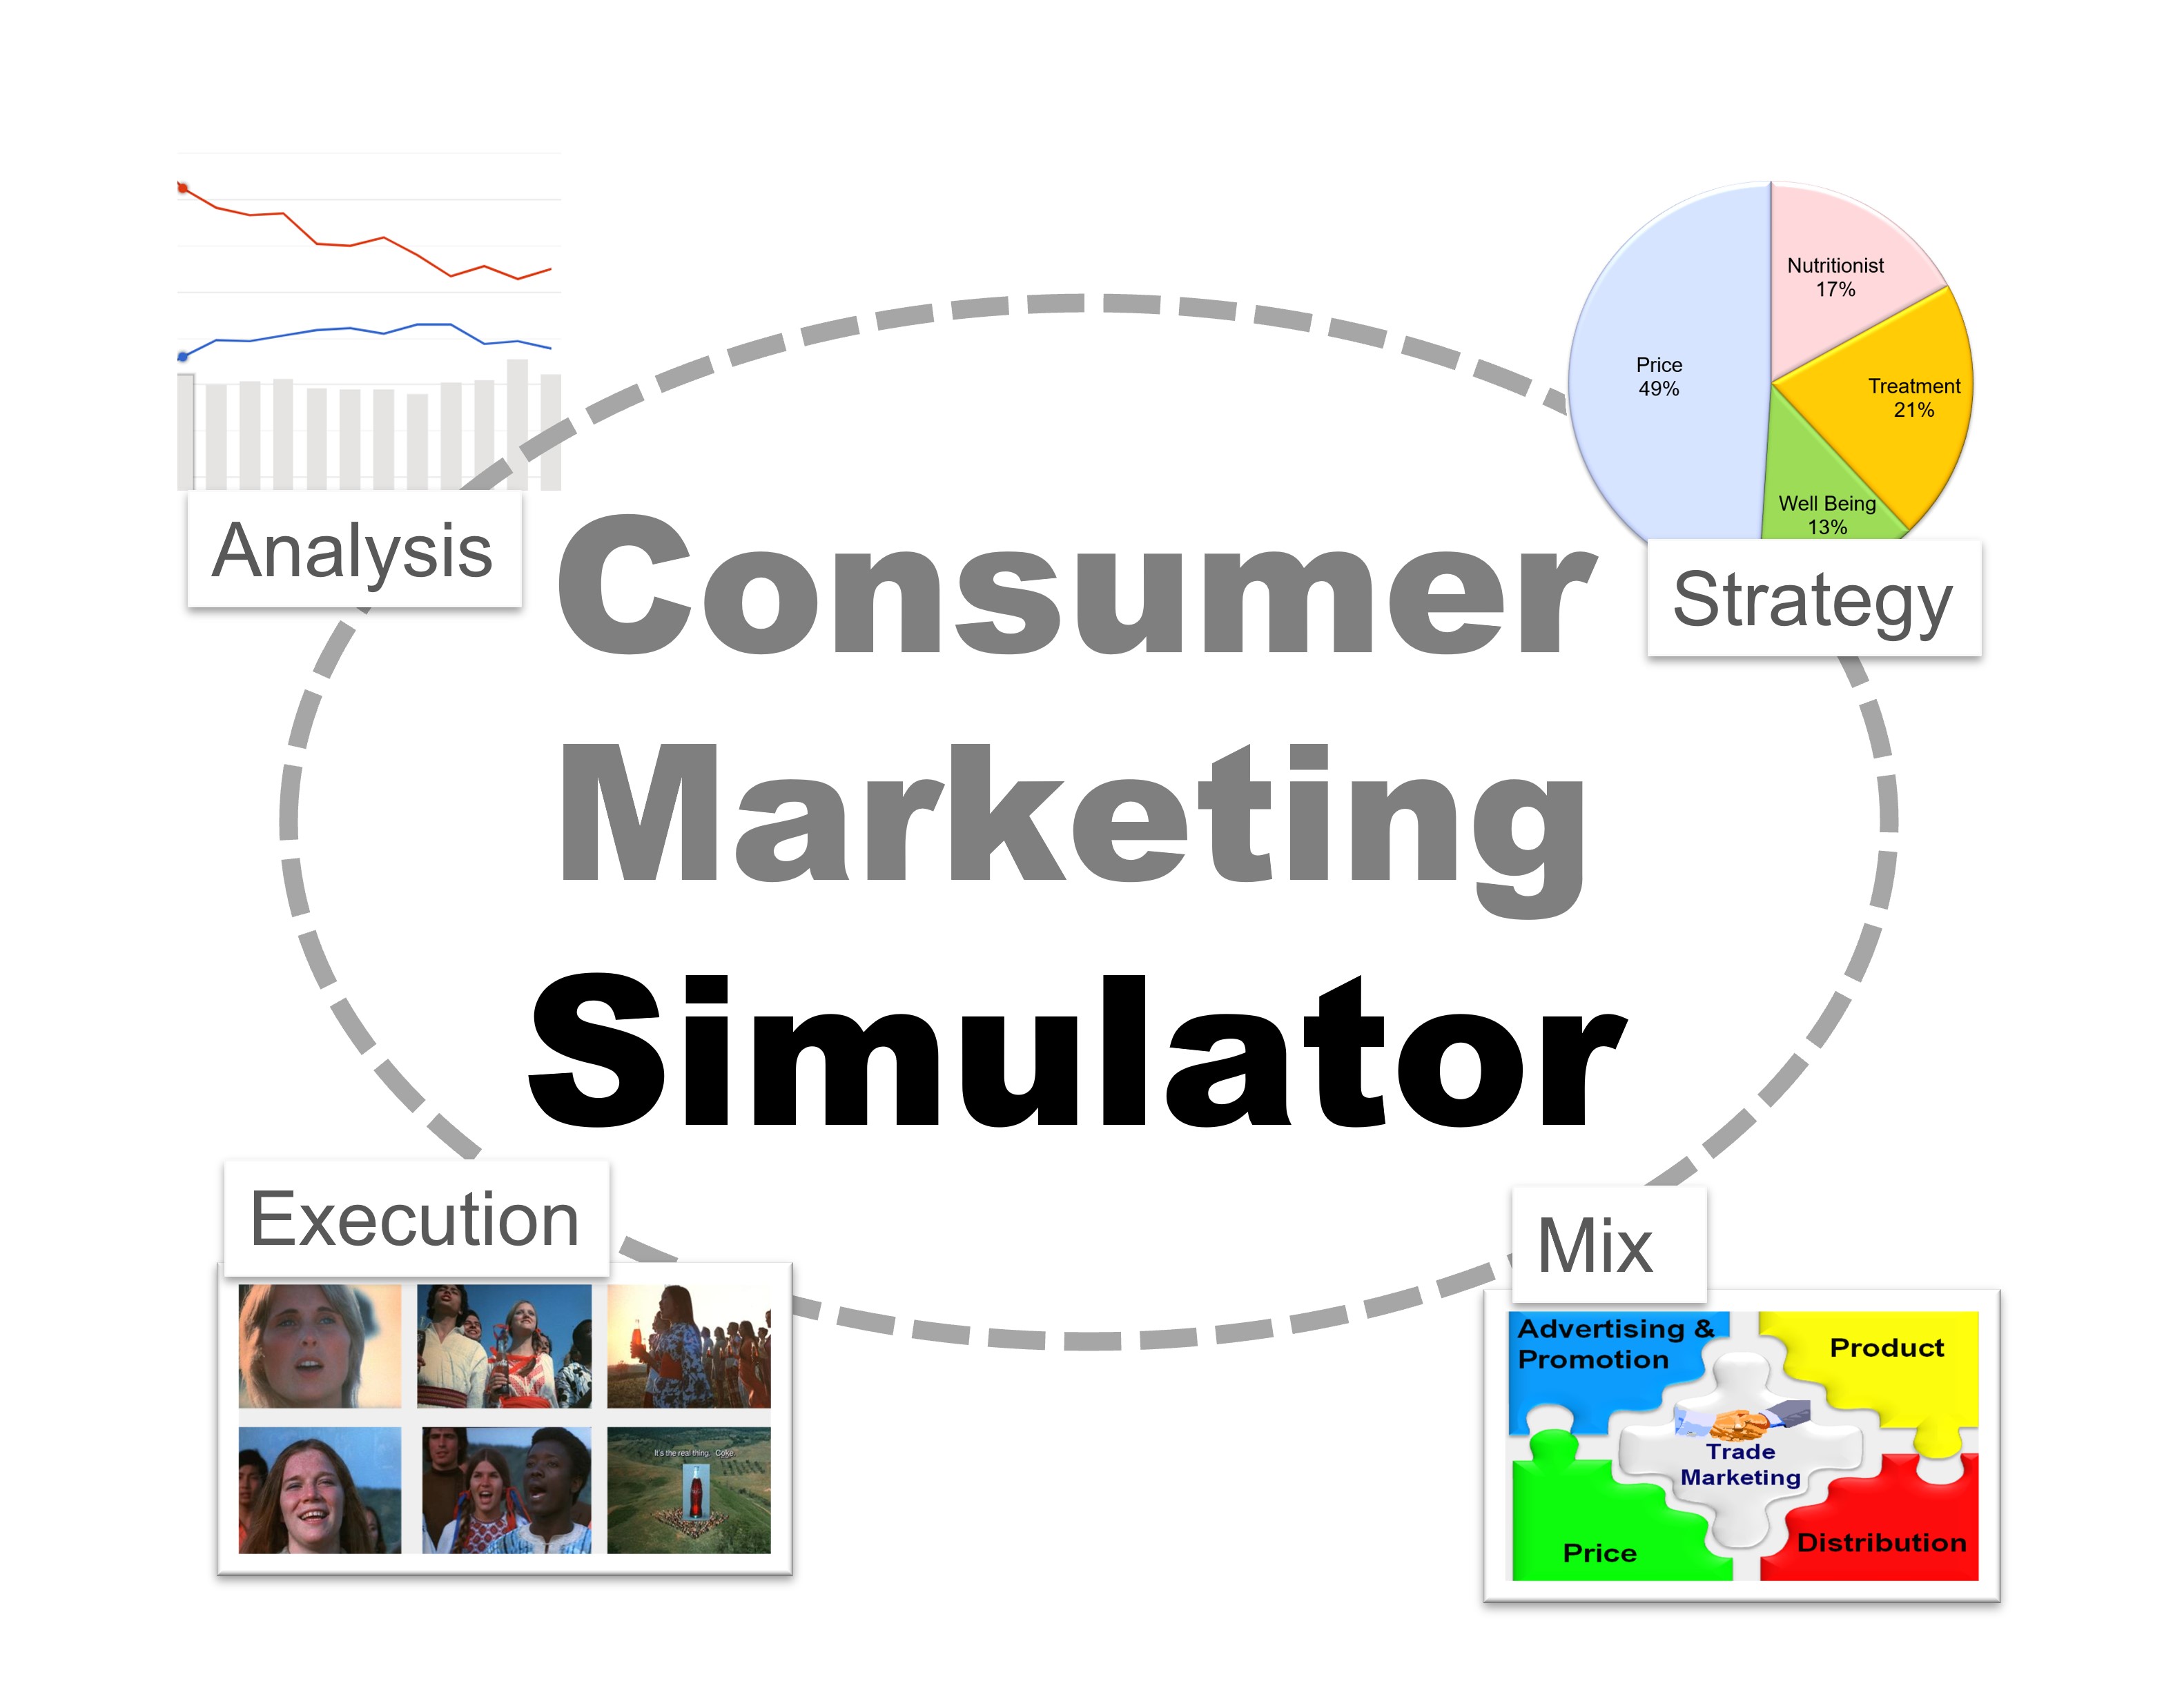 Experiential Learning via Simulators | Best Way to Train Marketers